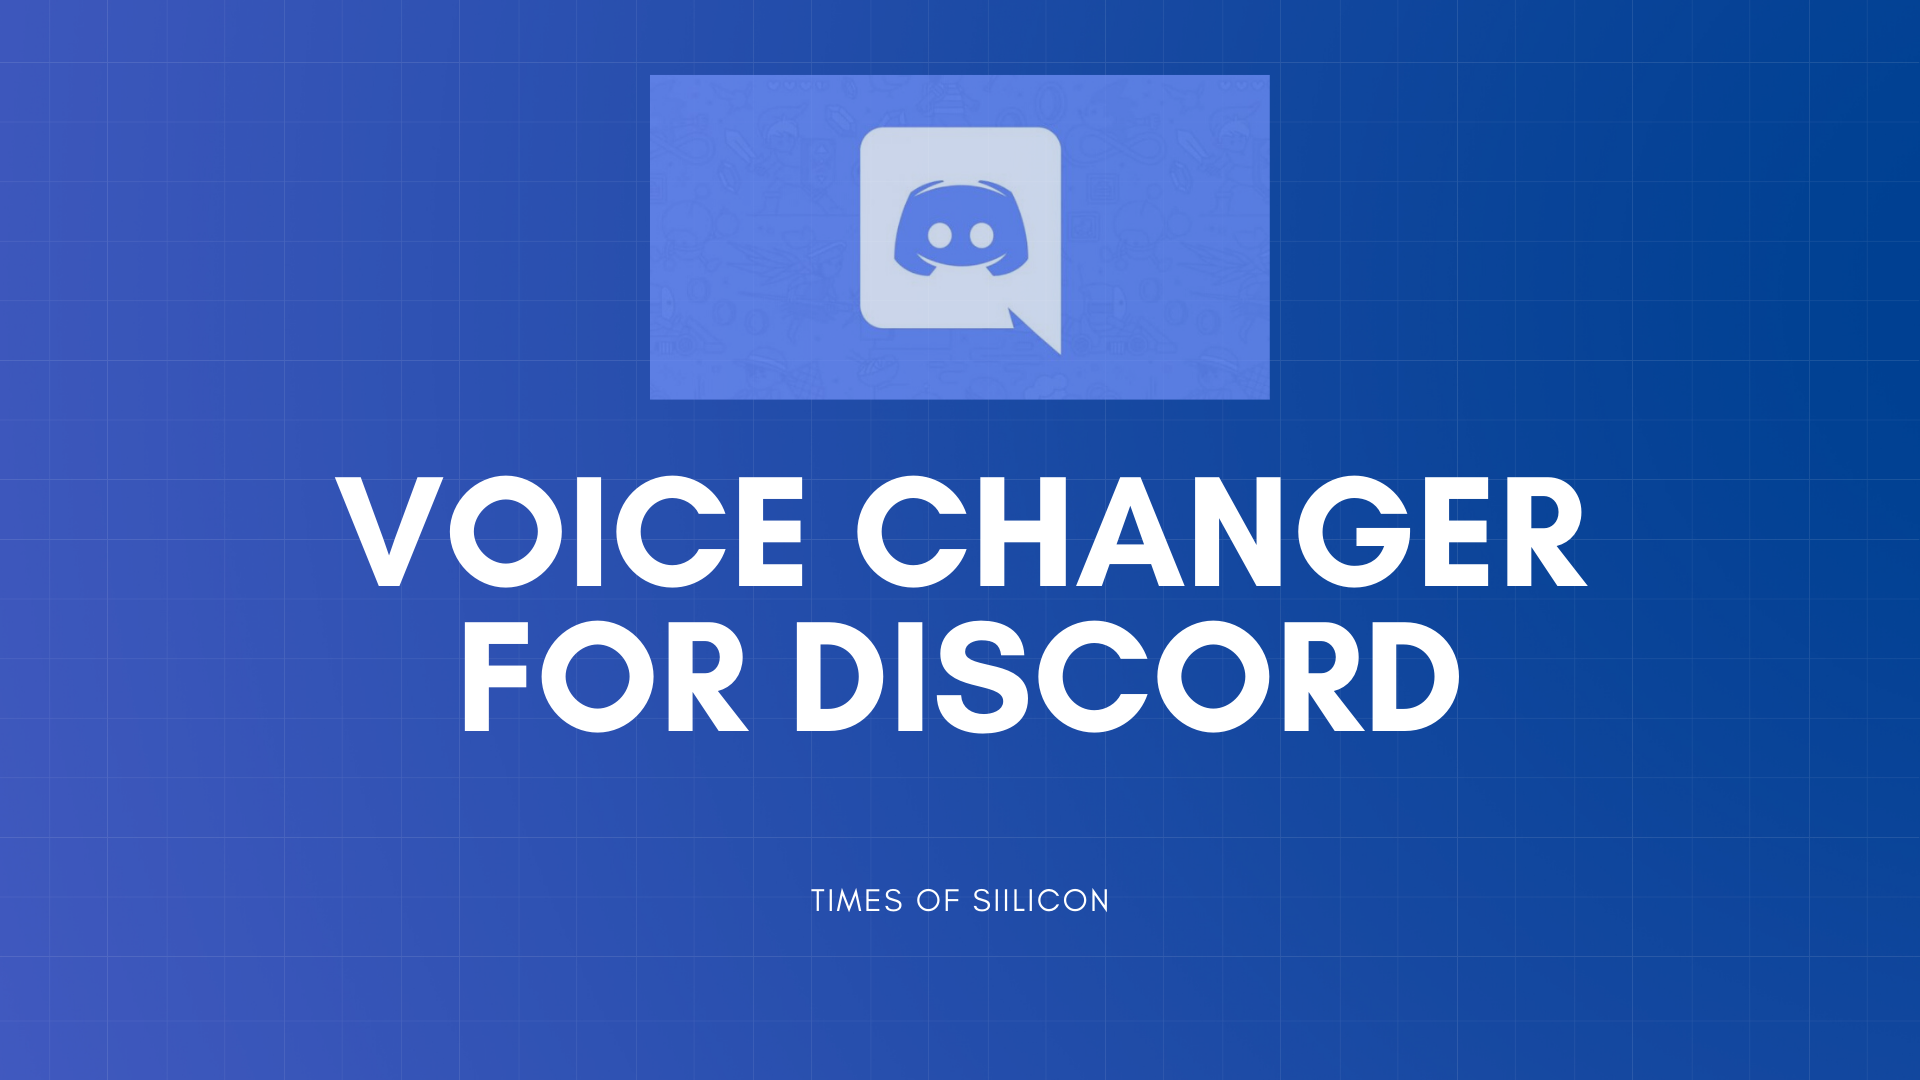 Voice changer for discord